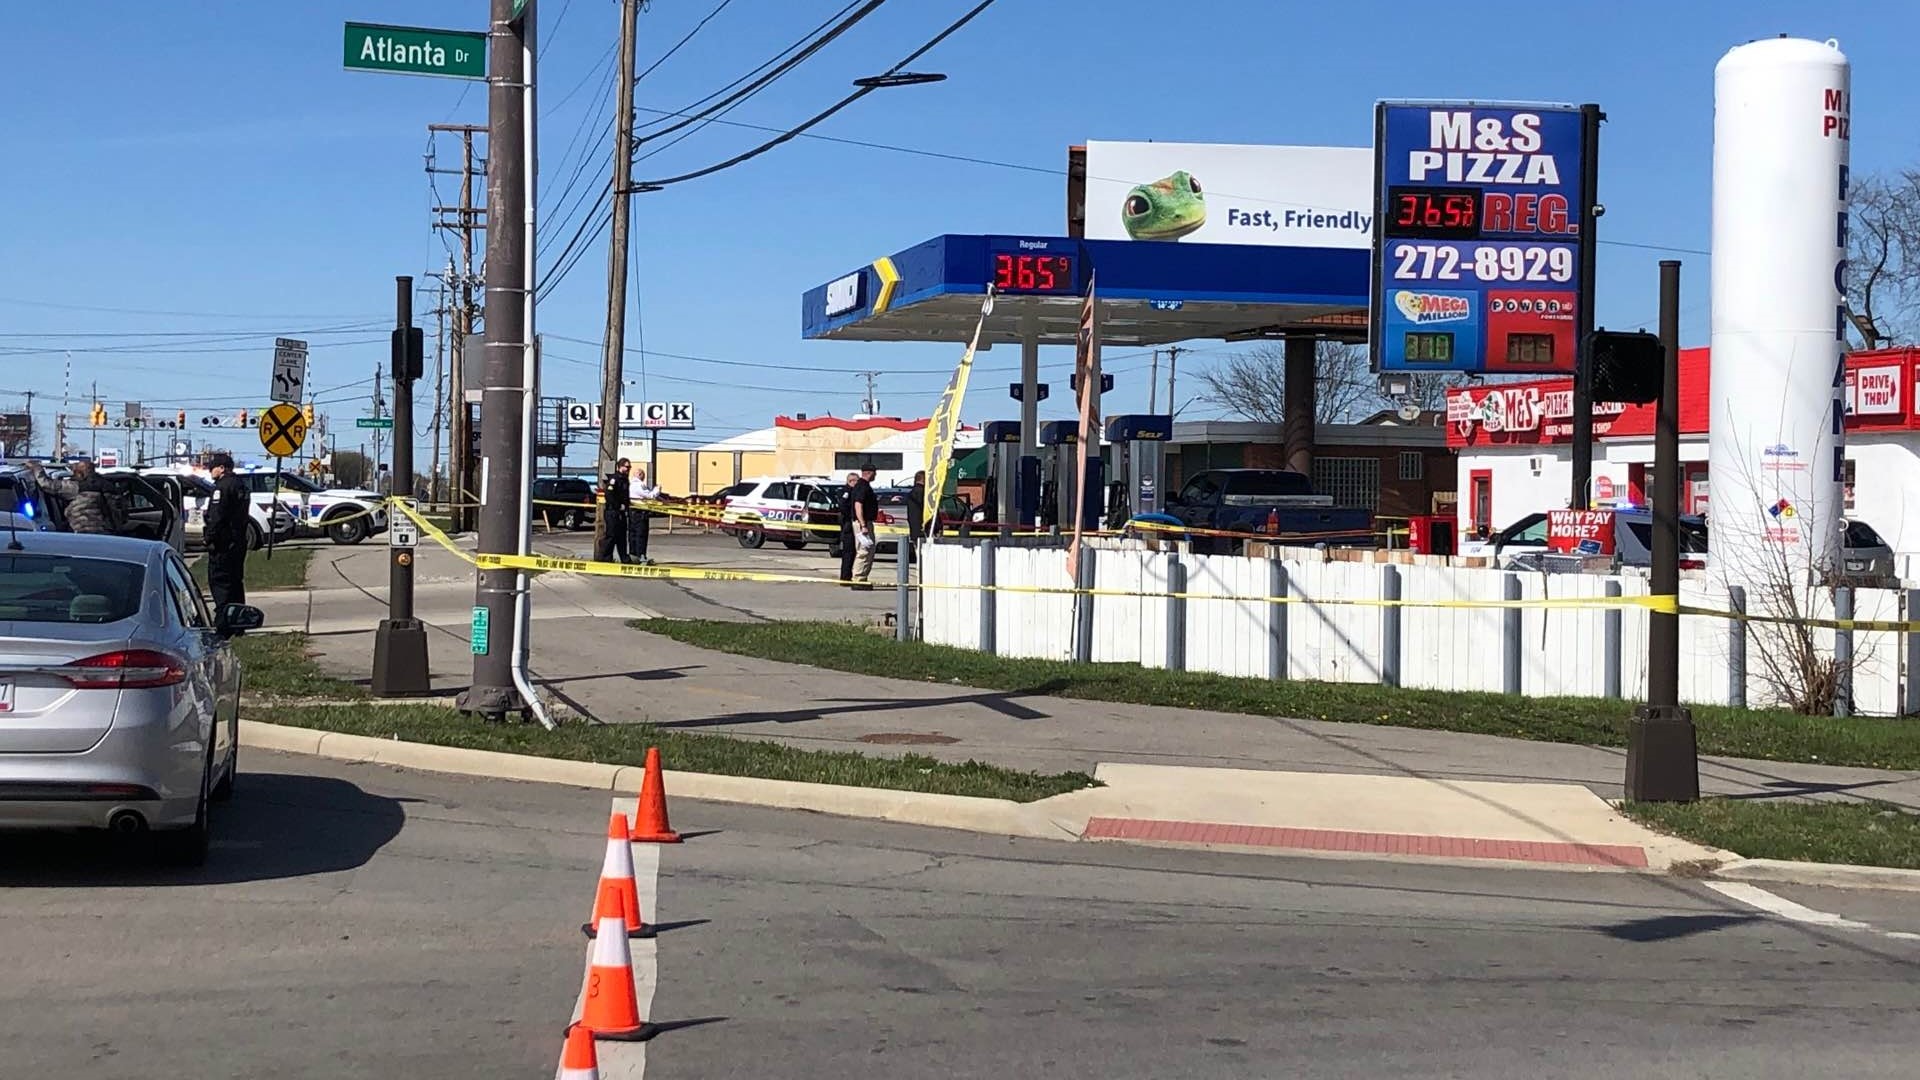 A man is in critical condition after a reported shooting outside a gas station on the city's west side Sunday afternoon.